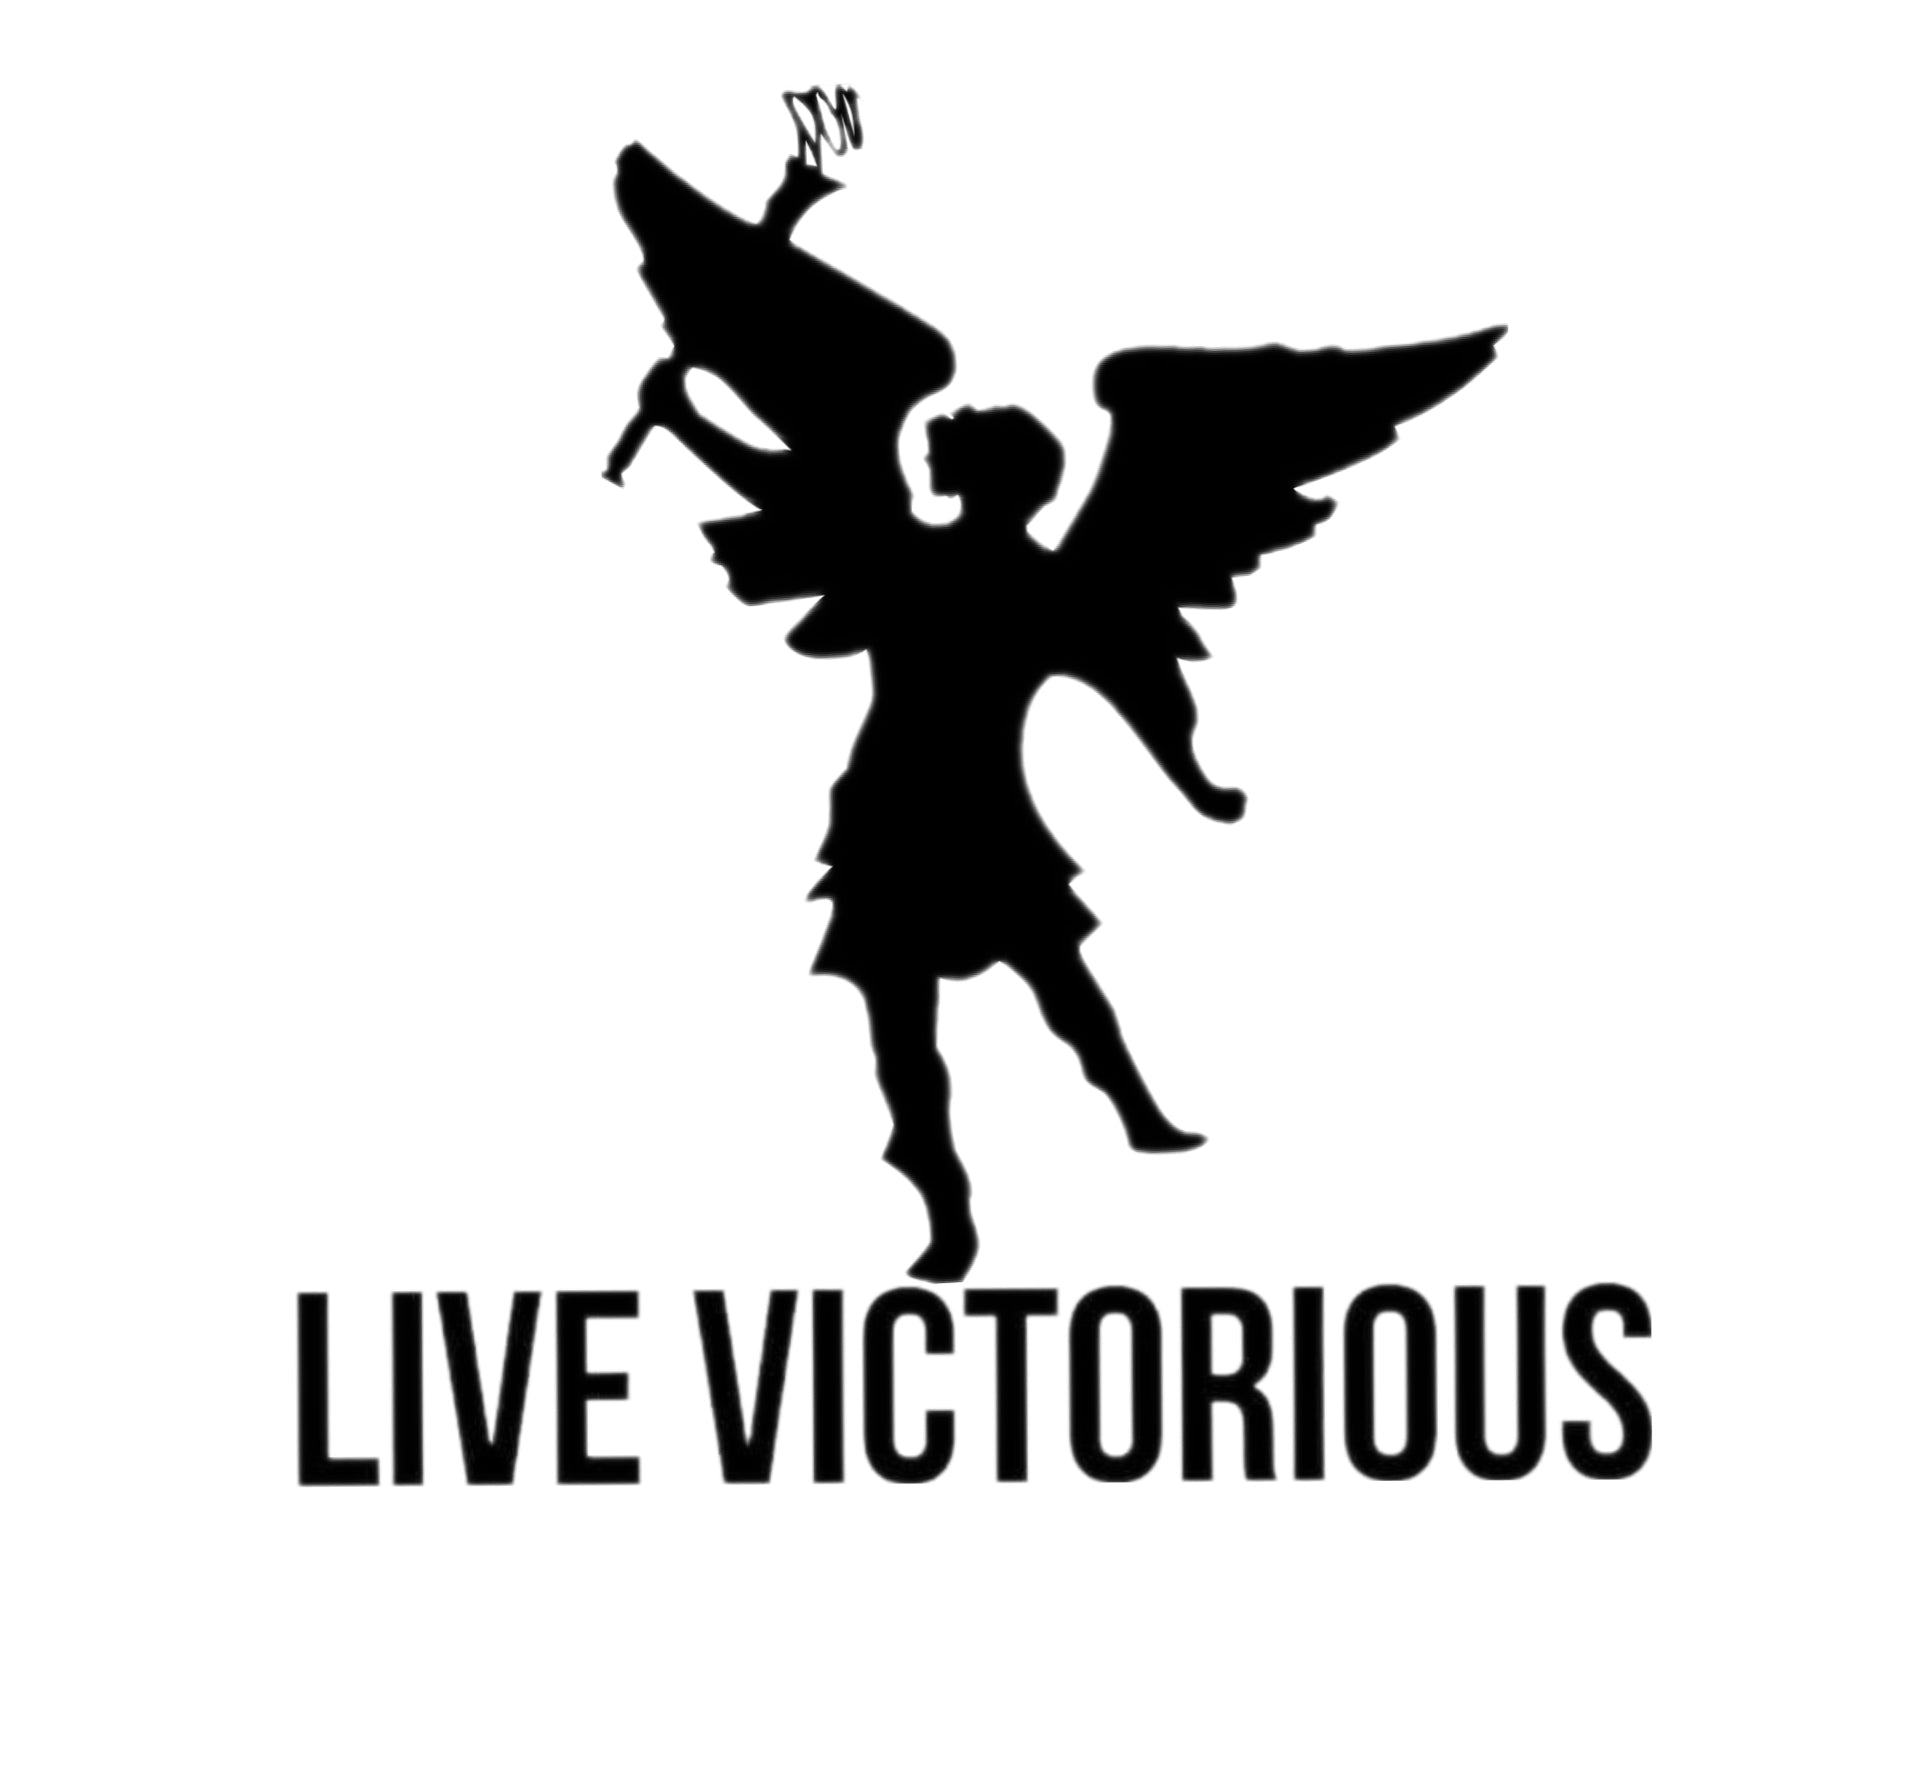 Live Victorious.